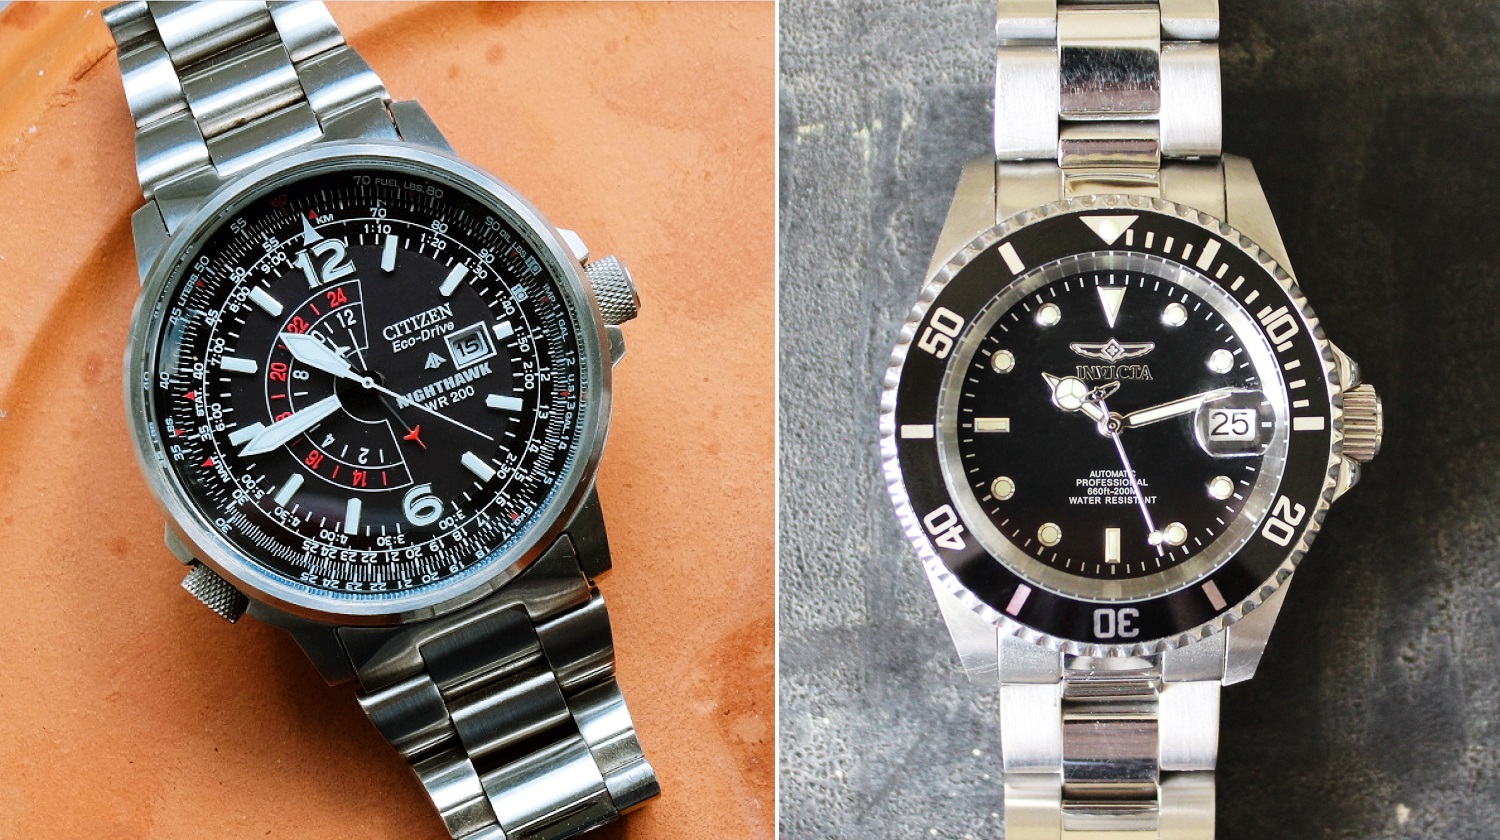 Steal Alert: Citizen Nighthawk & Invicta Automatic Diver One Day Deals on  Amazon